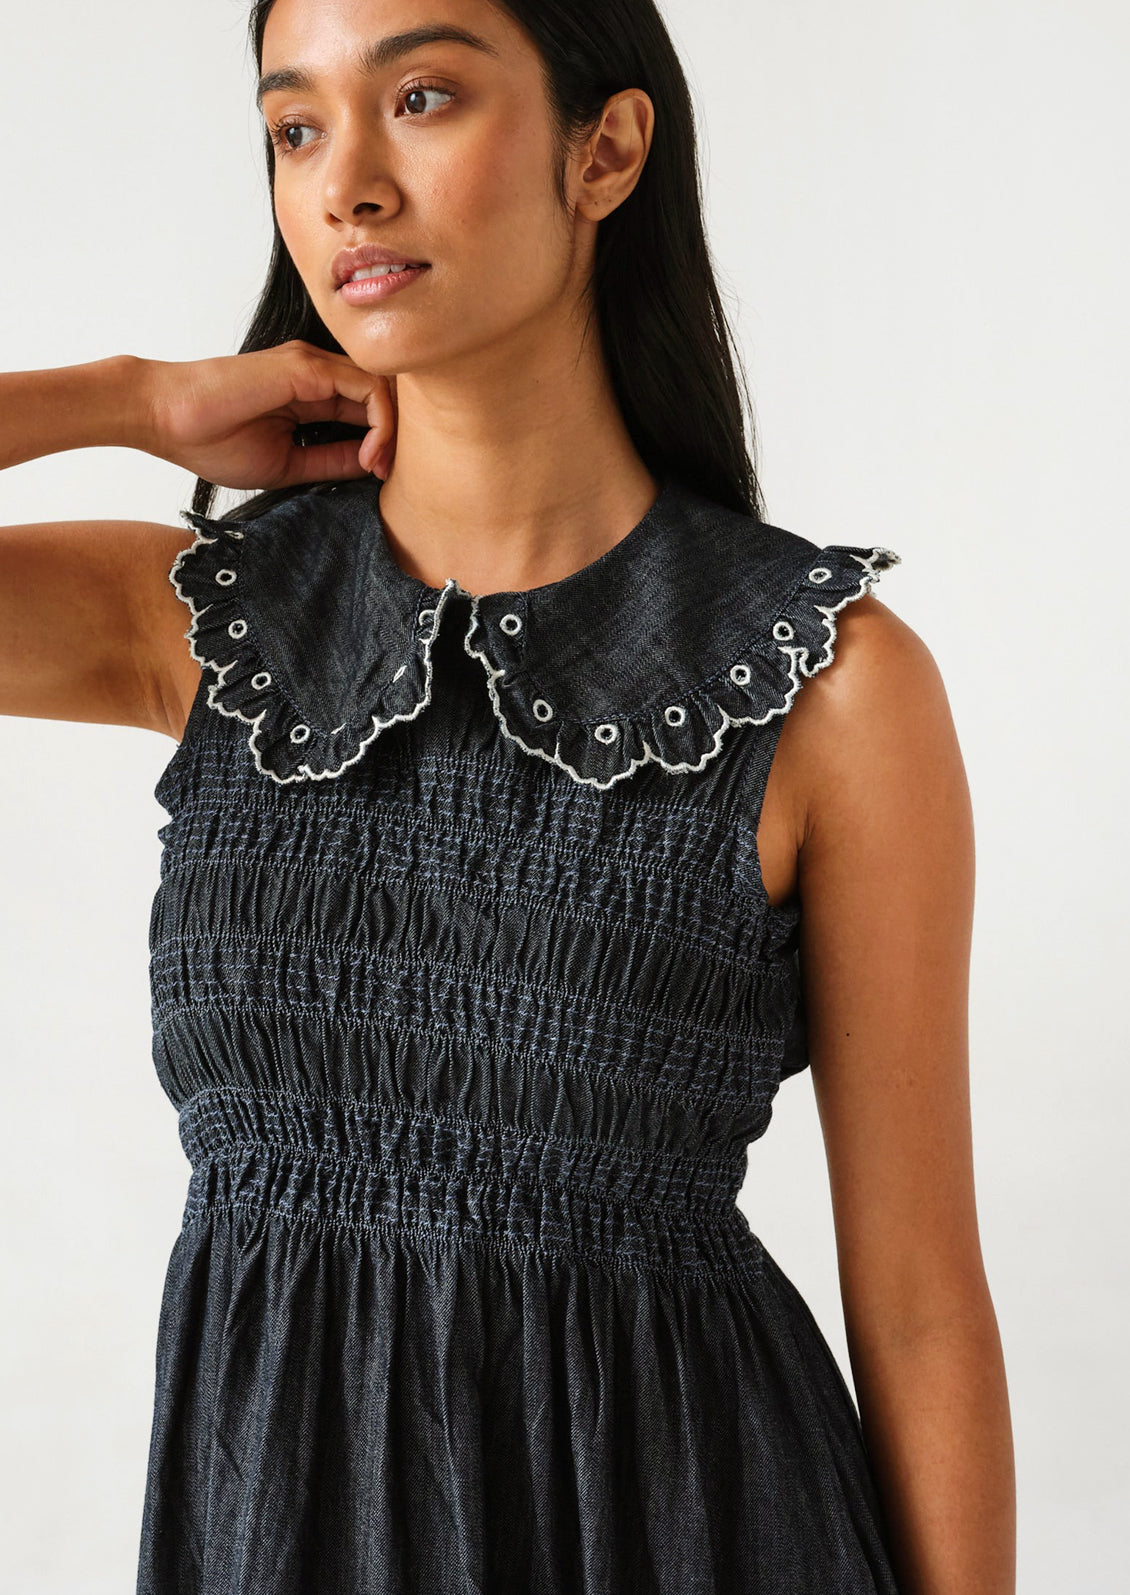 A woman wearing a denim dress with a smocked bodice and an embroidered collar with white stitching.